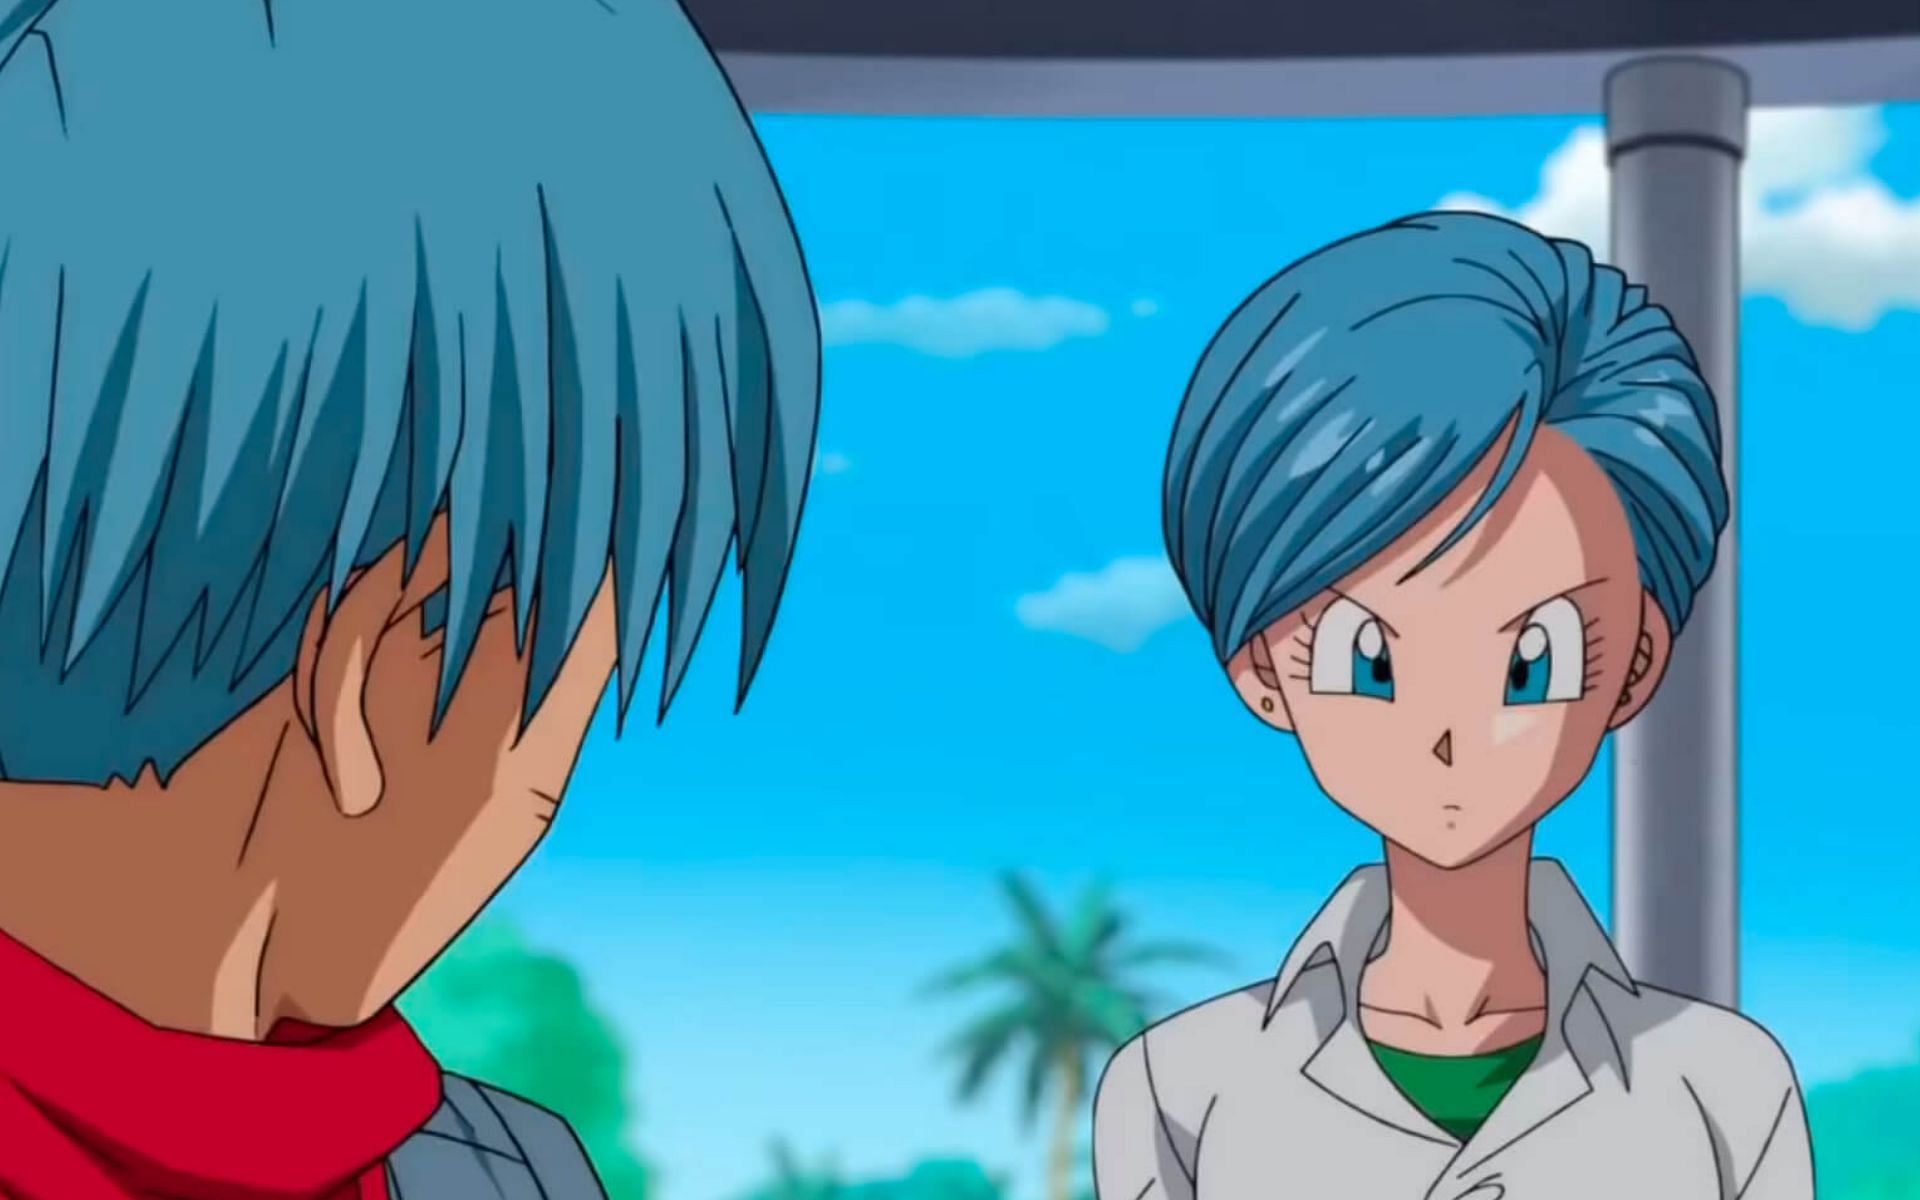 Bulma and Trunks are two iconic anime characters with blue hair (Image via Toei Animation)